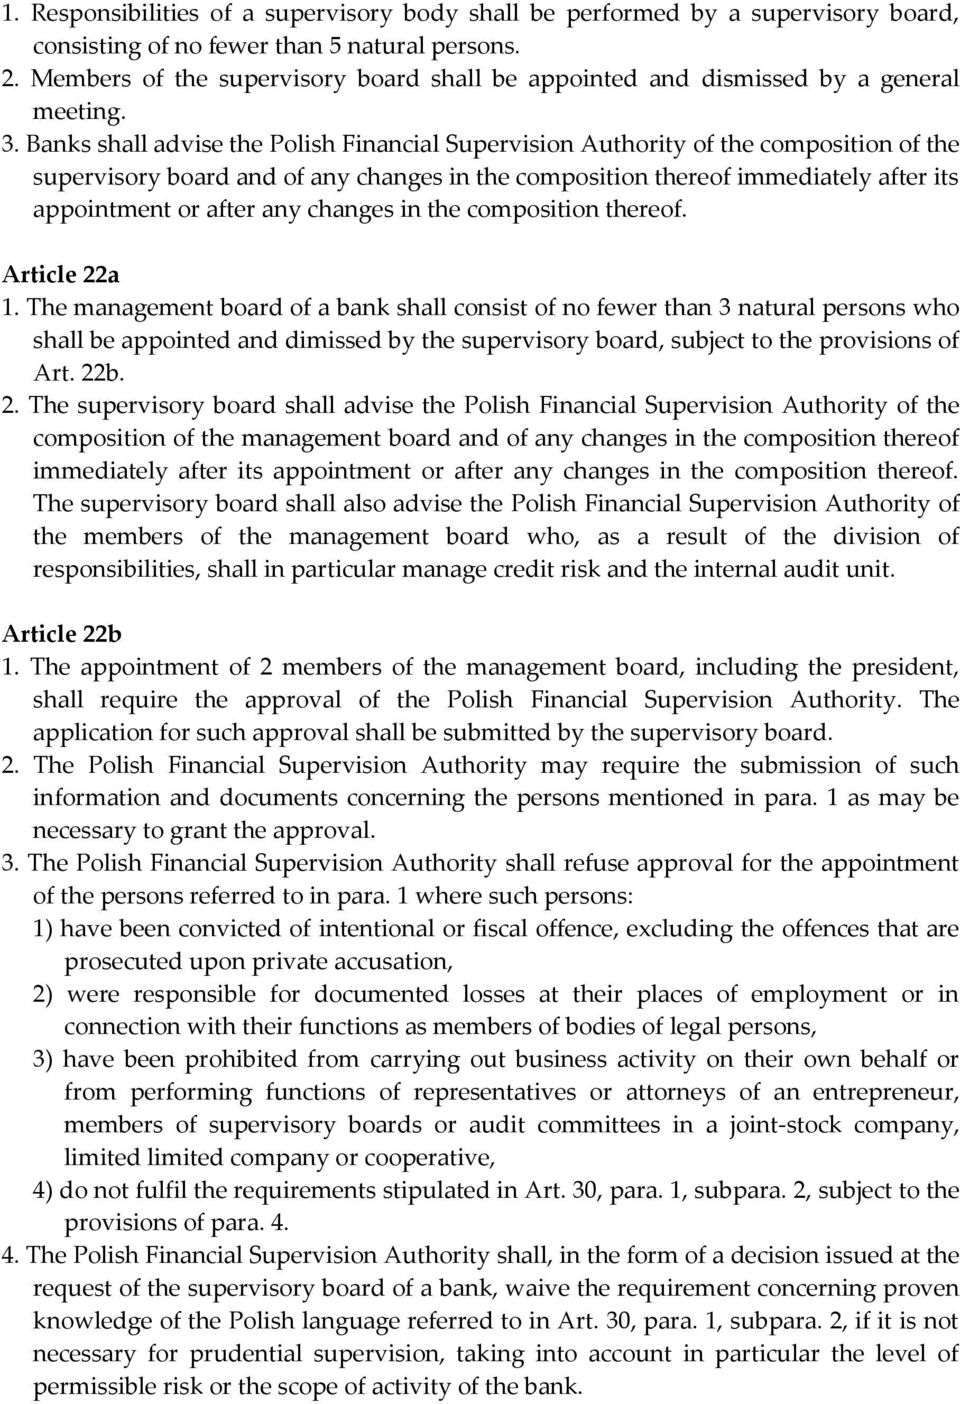 Banks shall advise the Polish Financial Supervision Authority of the composition of the supervisory board and of any changes in the composition thereof immediately after its appointment or after any